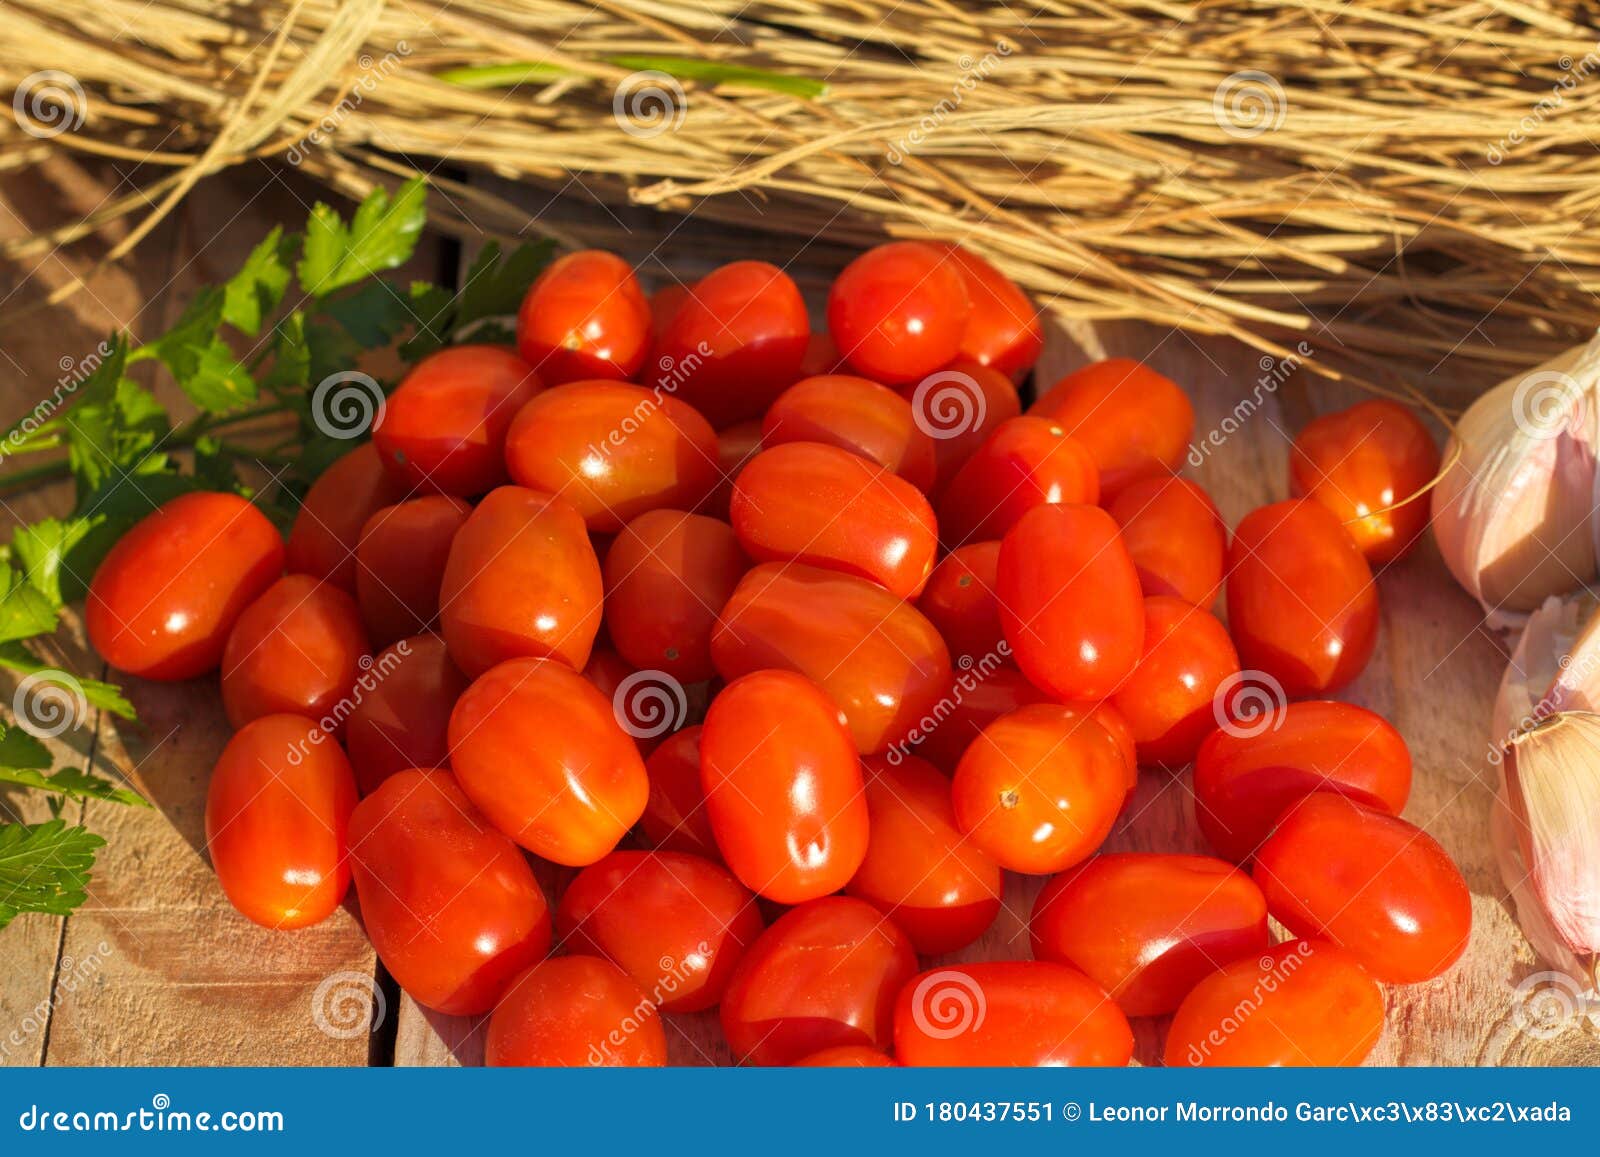 photograph of comer tomatoes on rustic background.